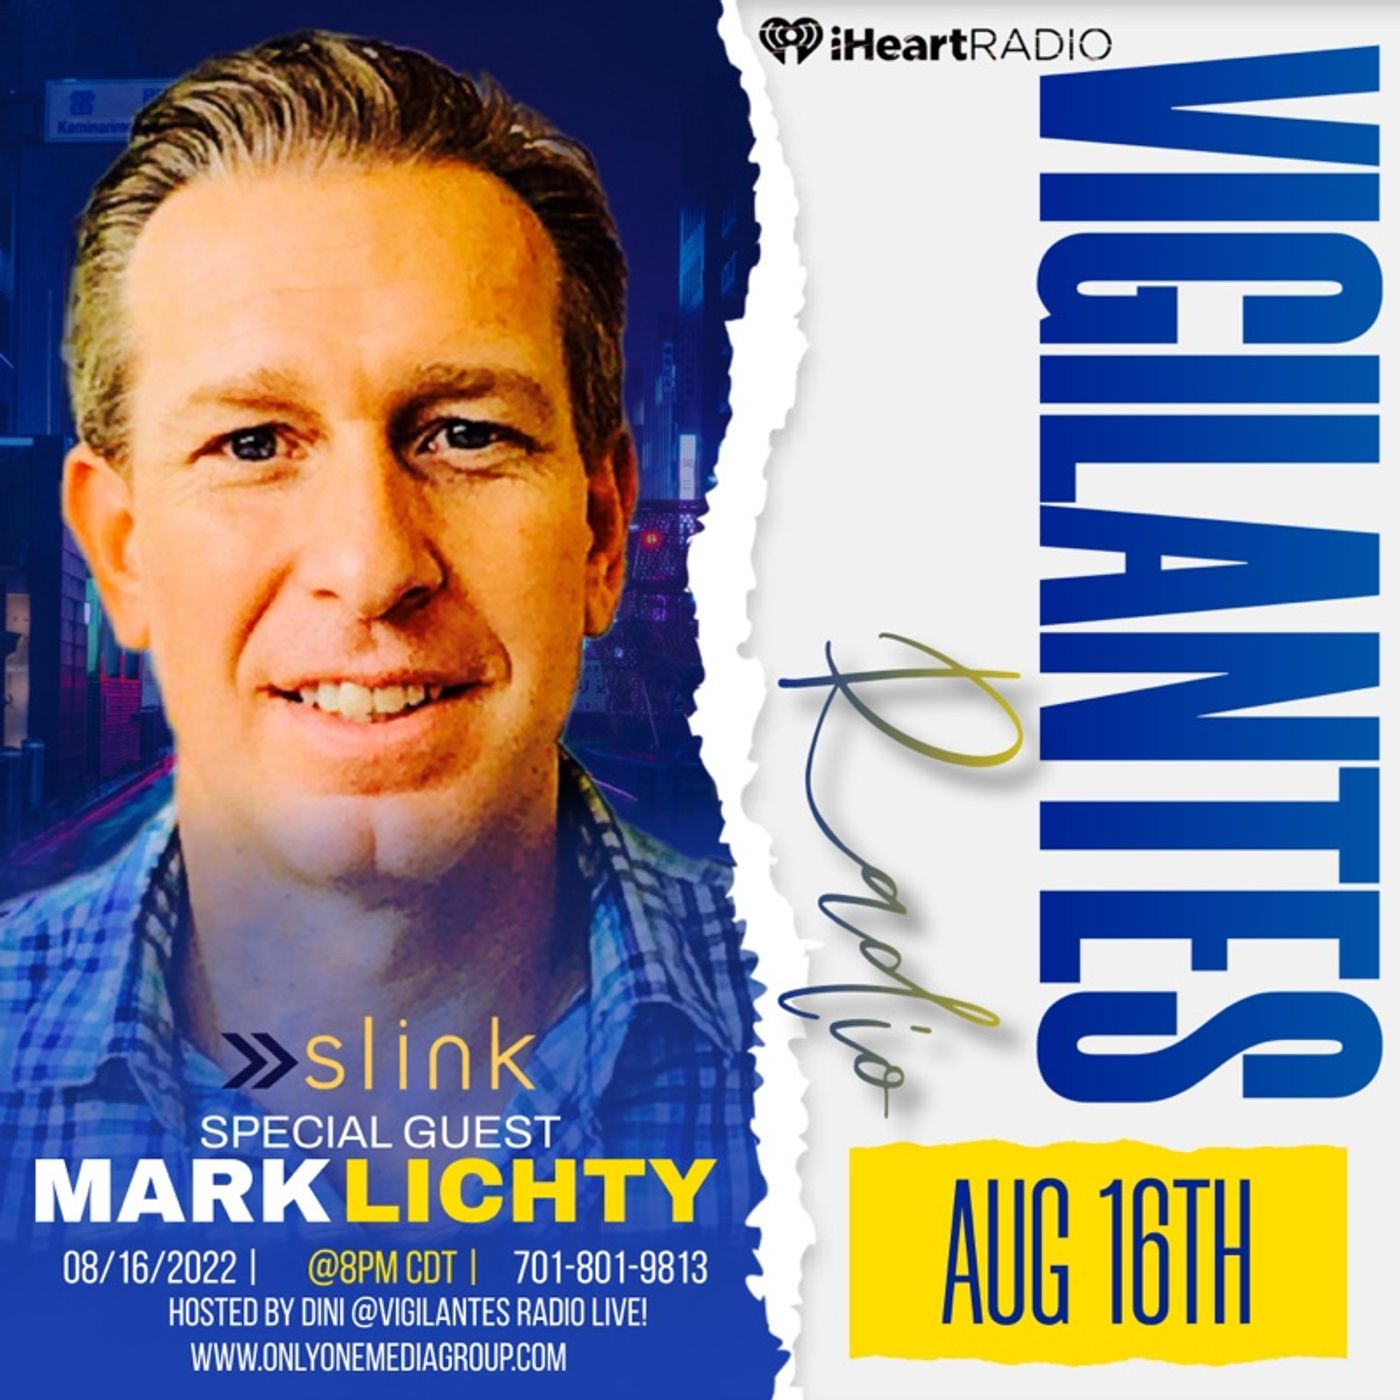 The Mark Lichty Interview. Image